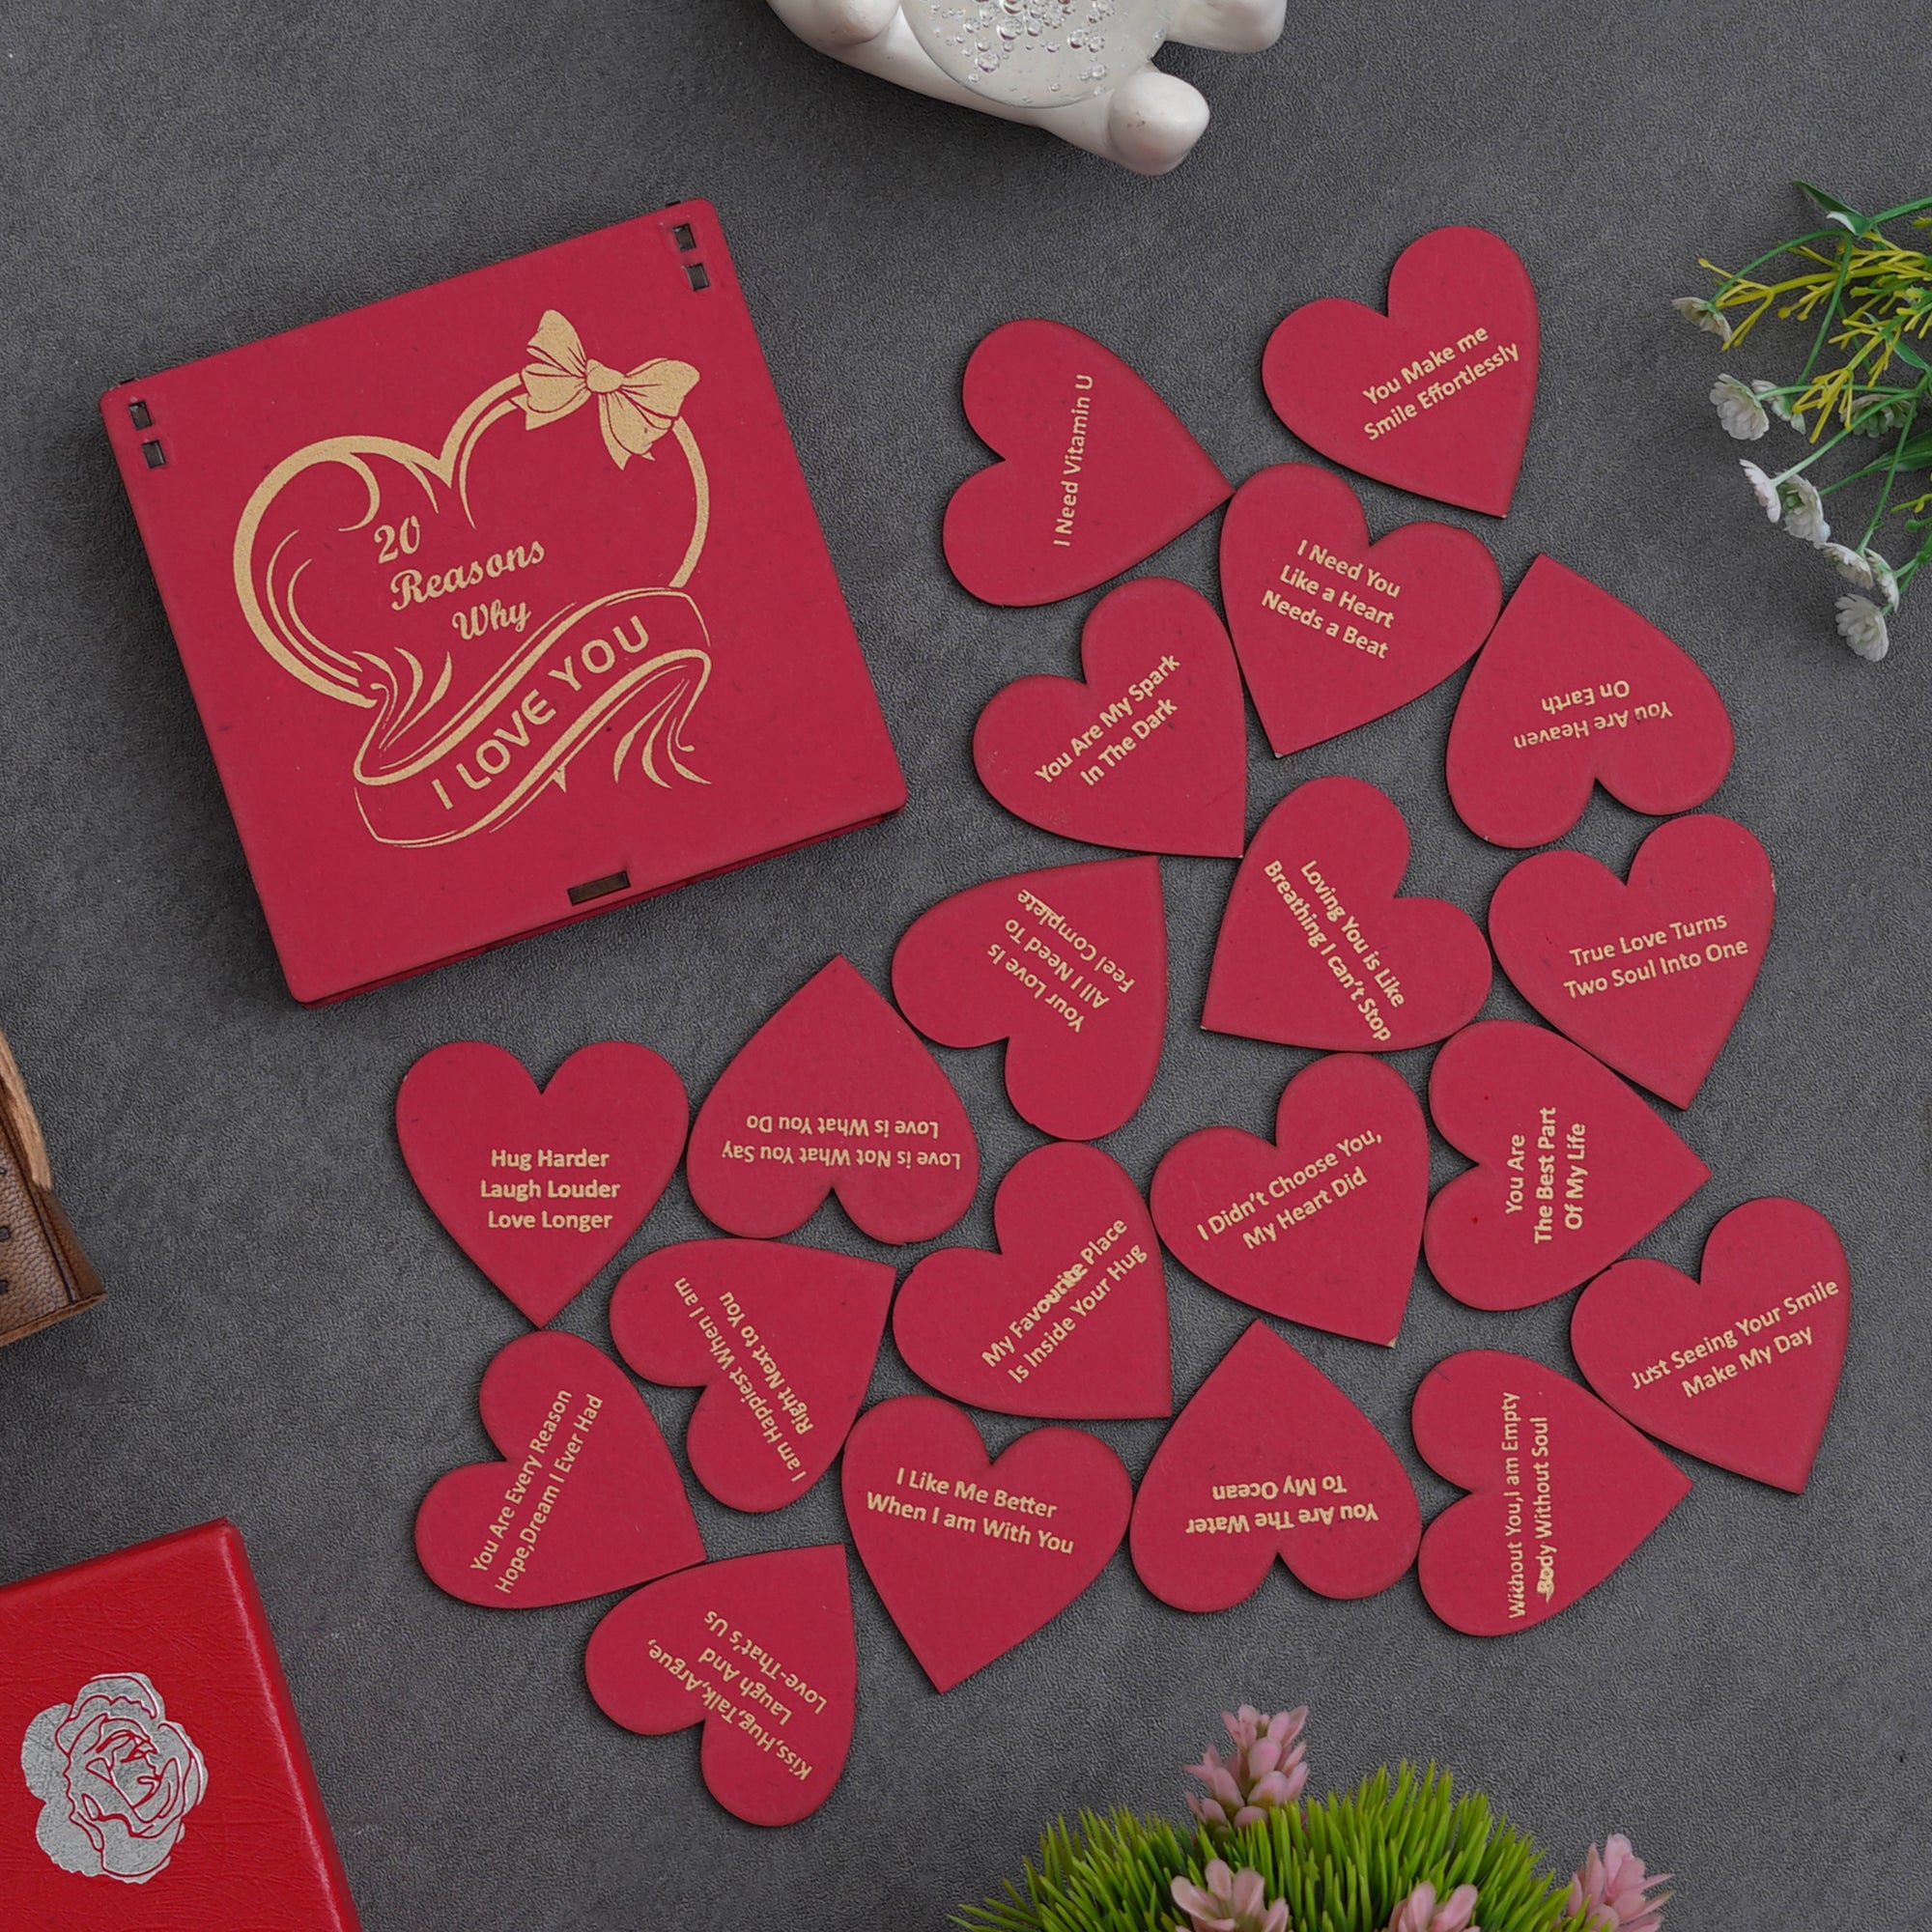 Valentine Combo of Card, "20 Reasons Why I Love You" Printed on Little Red Hearts Decorative Wooden Gift Set Box, Pink Heart Shaped Gift Box with Teddy and Roses 3